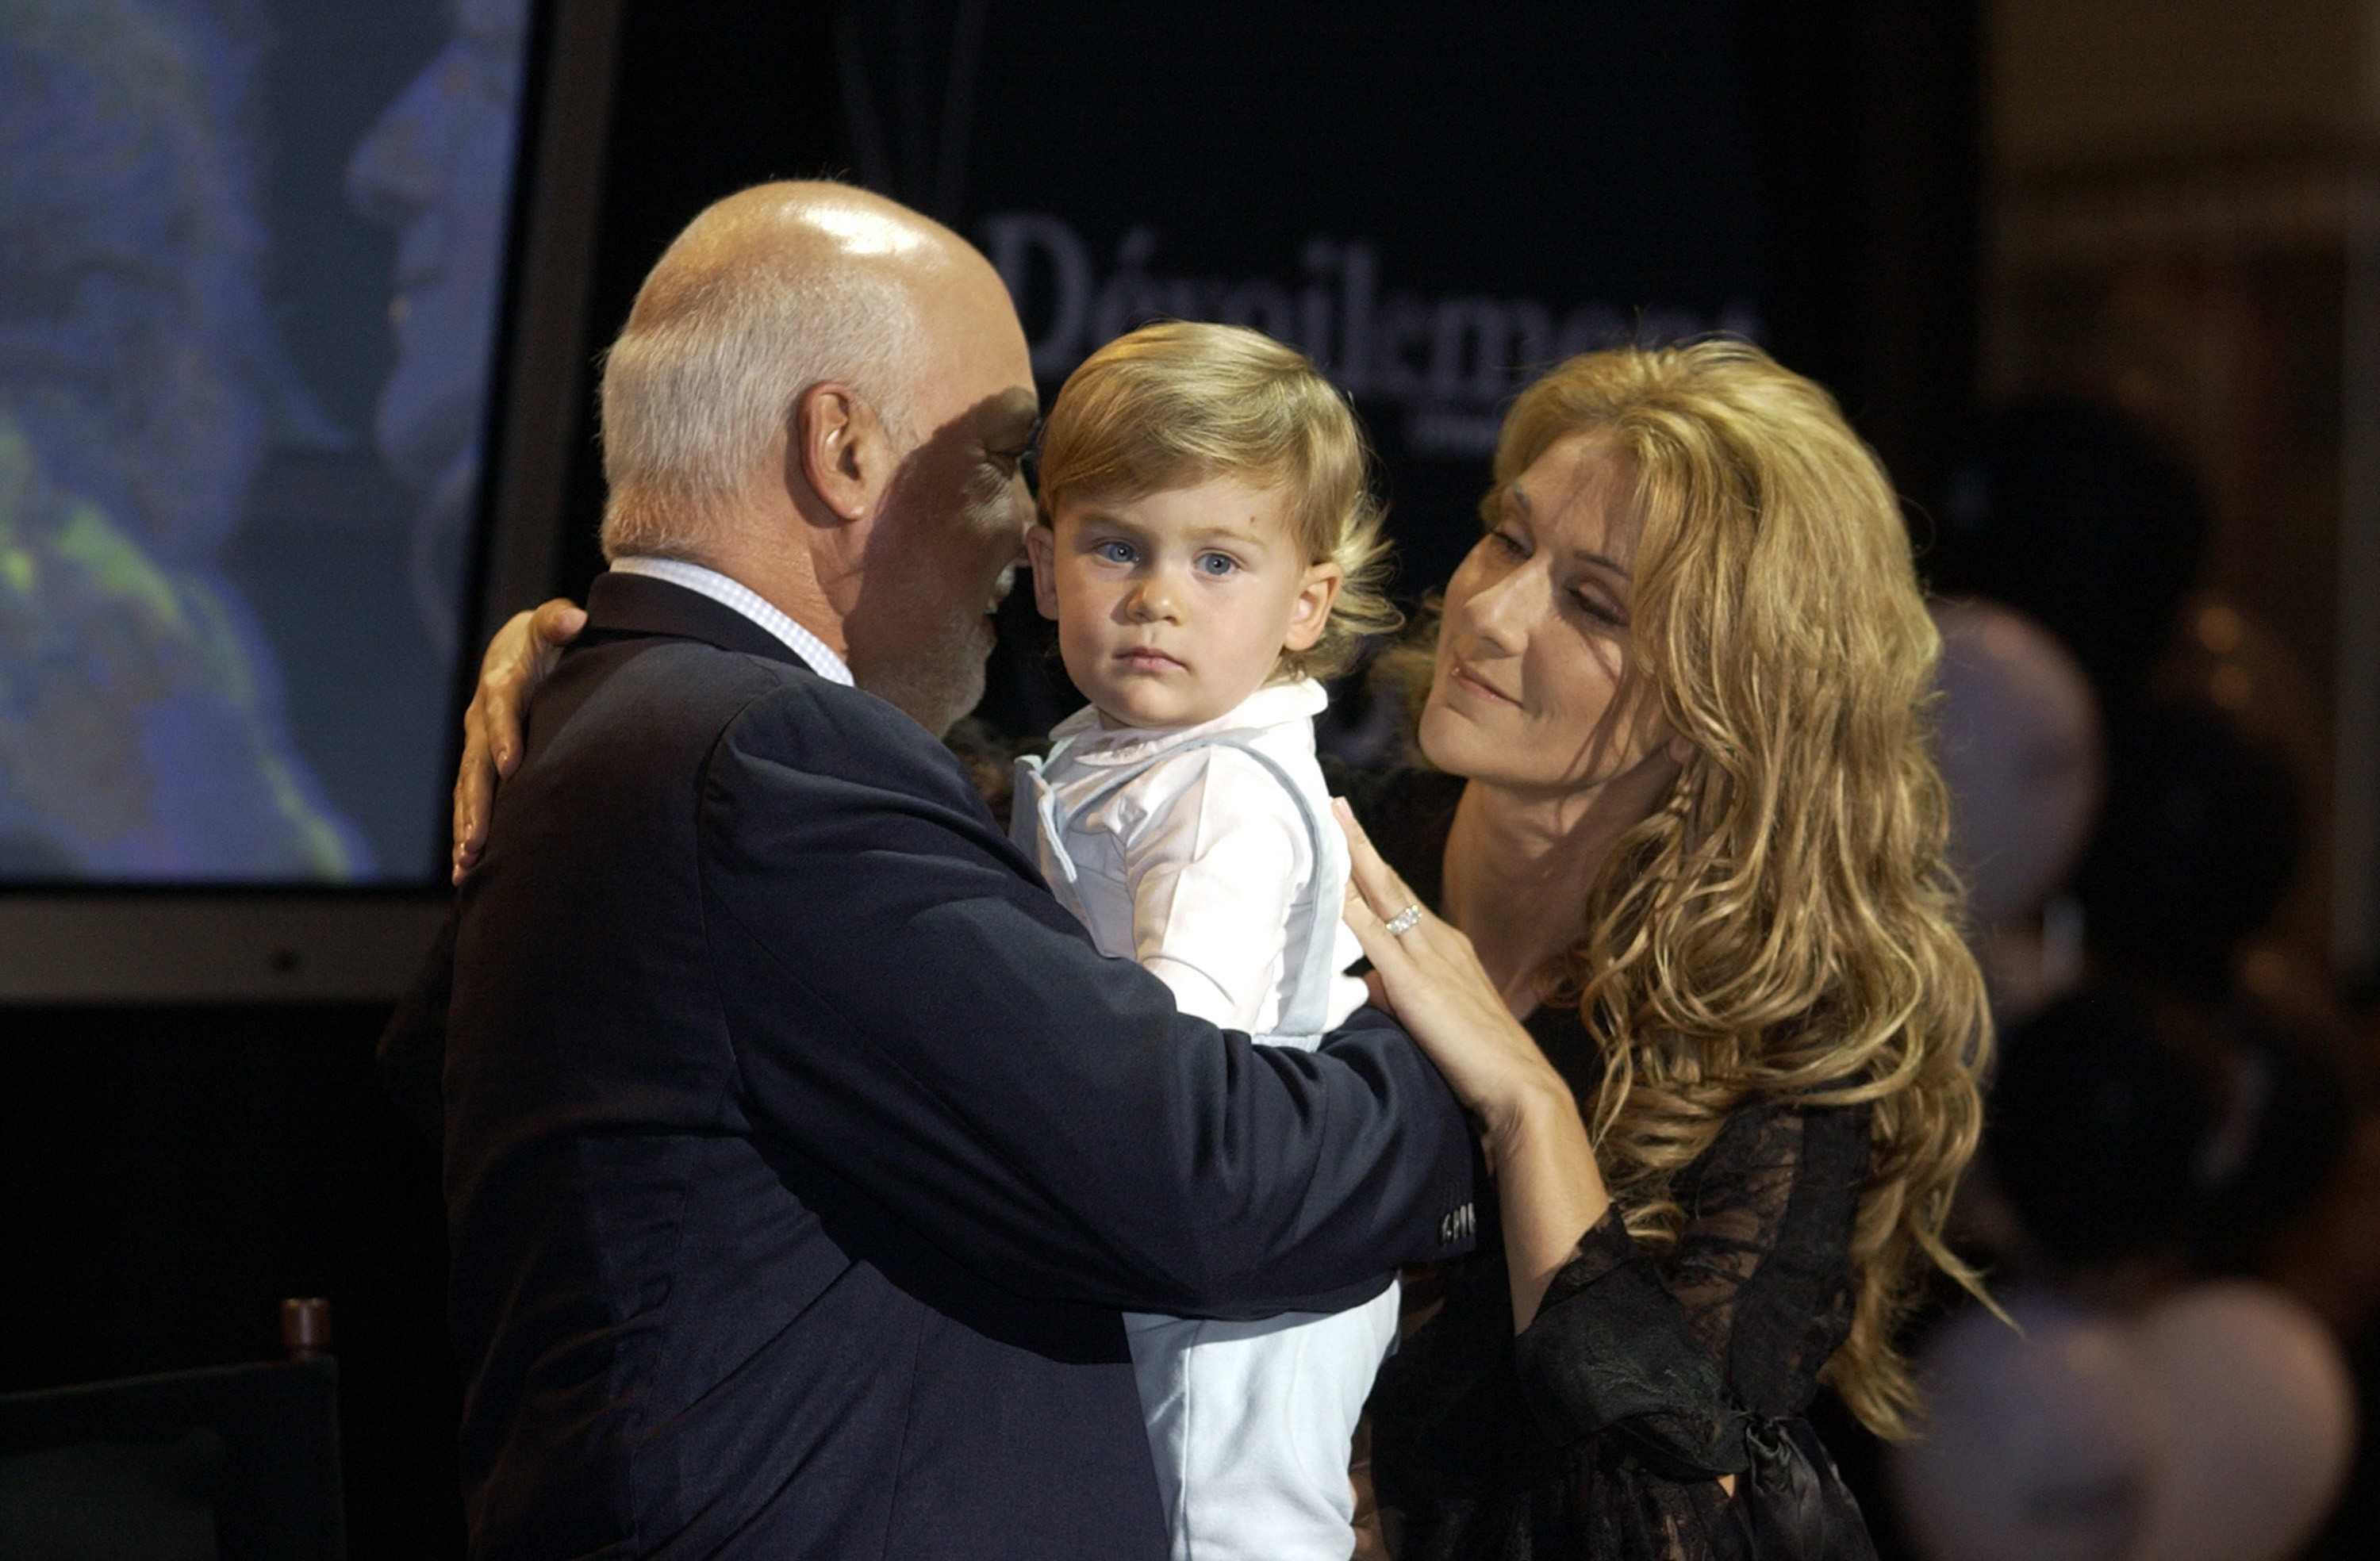 René and René-Charles Angélil with Celine Dion at an event in 2002 | Source: Getty Images